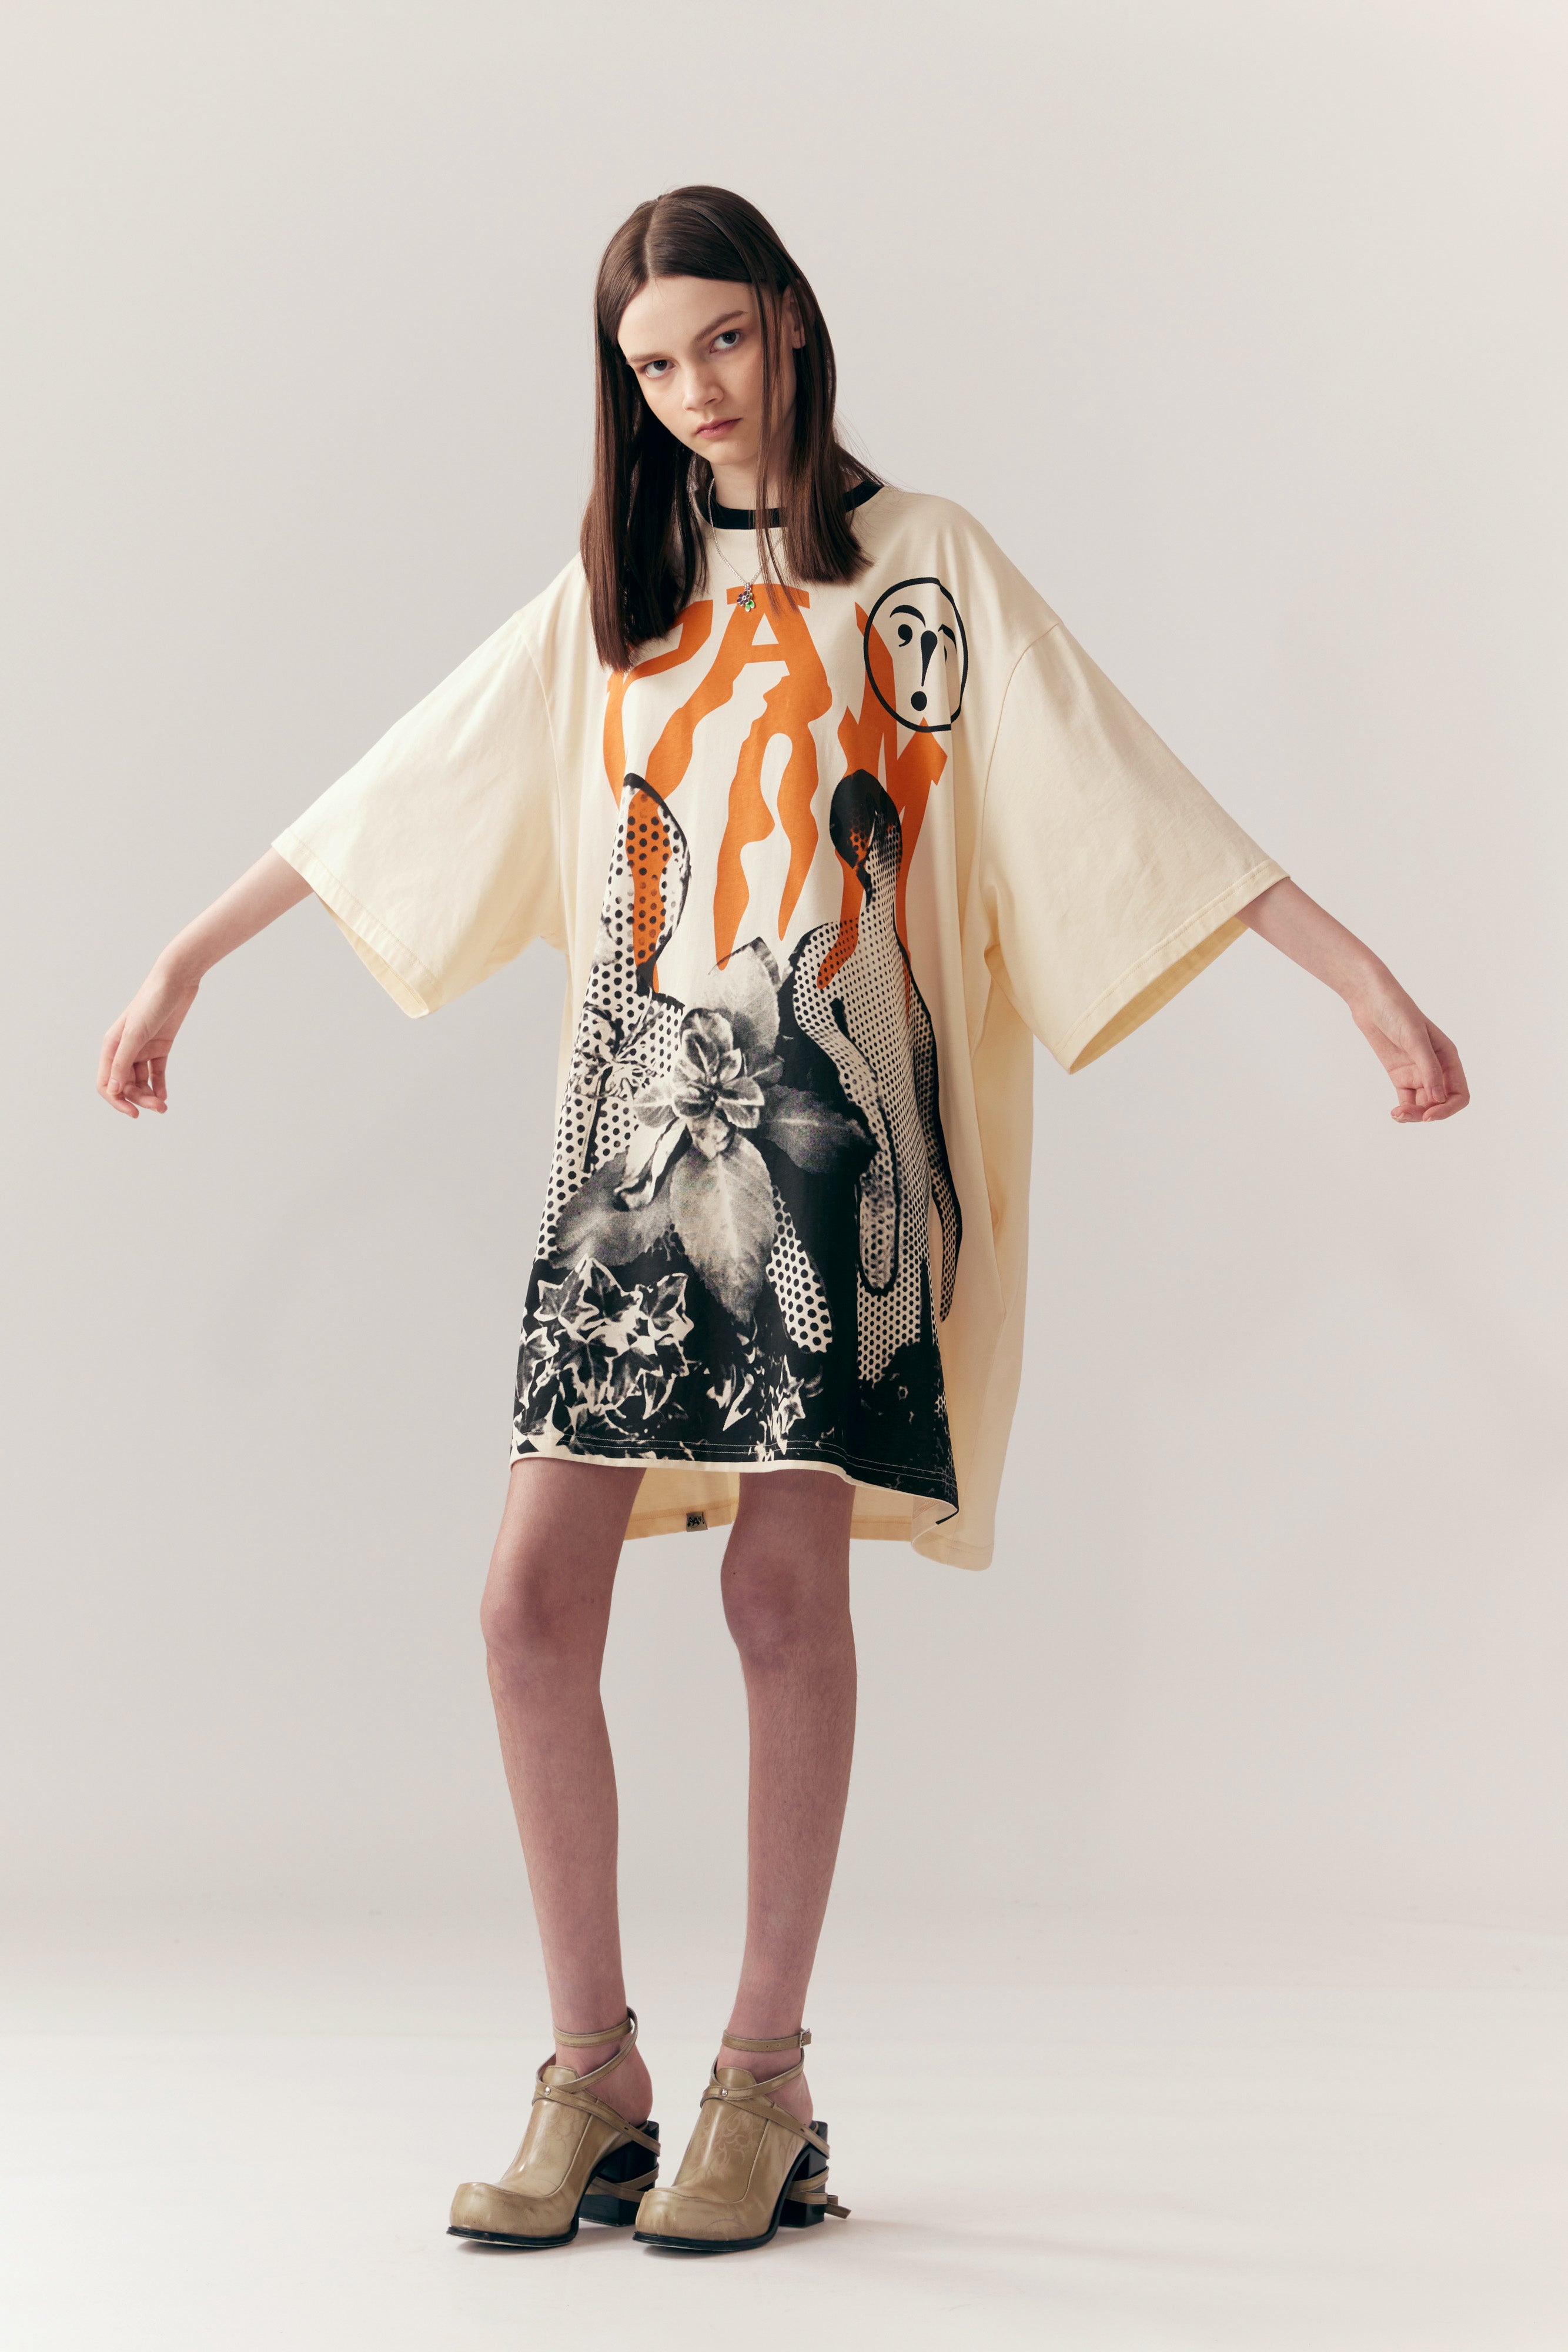 The IVY OVERSIZED T SHIRT DRESS  available online with global shipping, and in PAM Stores Melbourne and Sydney.